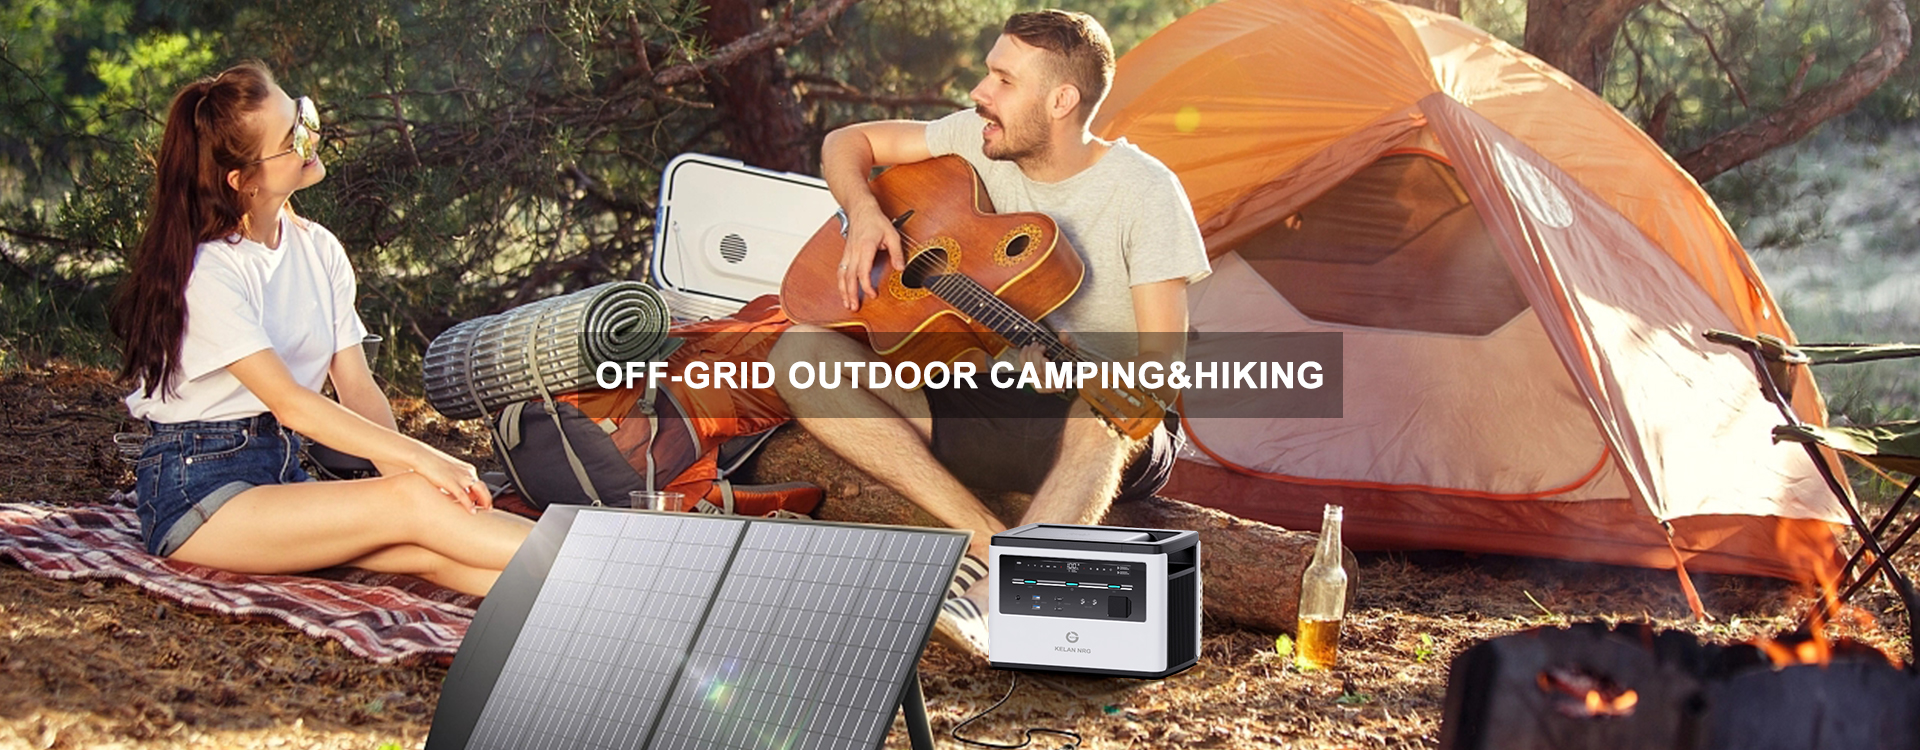 off-grid-outdoor-camping-turistika